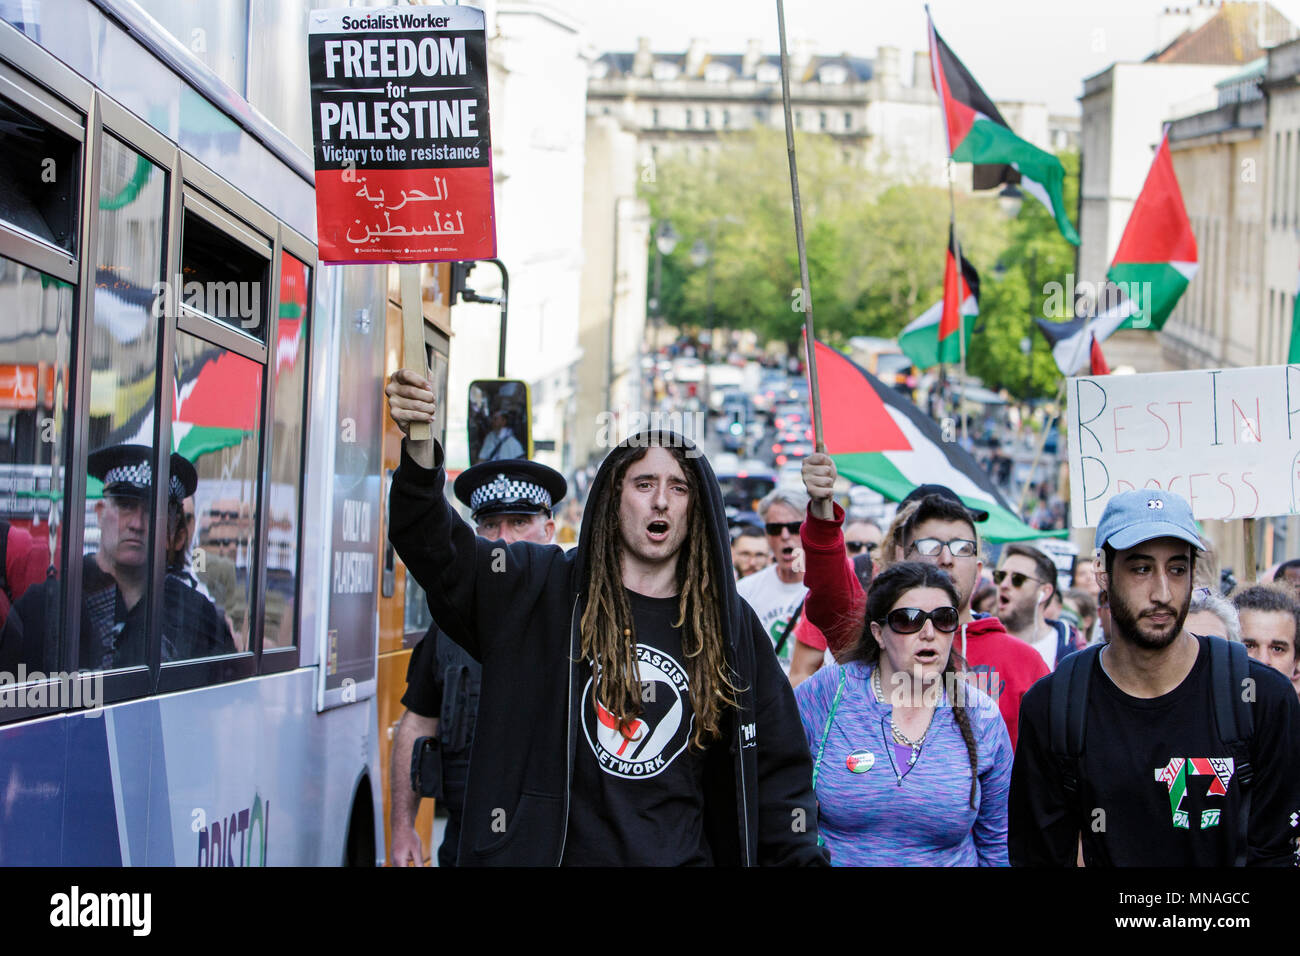 Bristol, UK. 15th May, 2018. Pro-Palestinian demonstrators holding placards and waving Palestinian flags are pictured as they march through Bristol in a protest march to show their solidarity with the Palestinian people. The protest march and rally was held to allow people to show their support and solidarity with the Palestinian people after 70 Years of Nakba and to protest about Israel's recent actions in Gaza Stock Photo